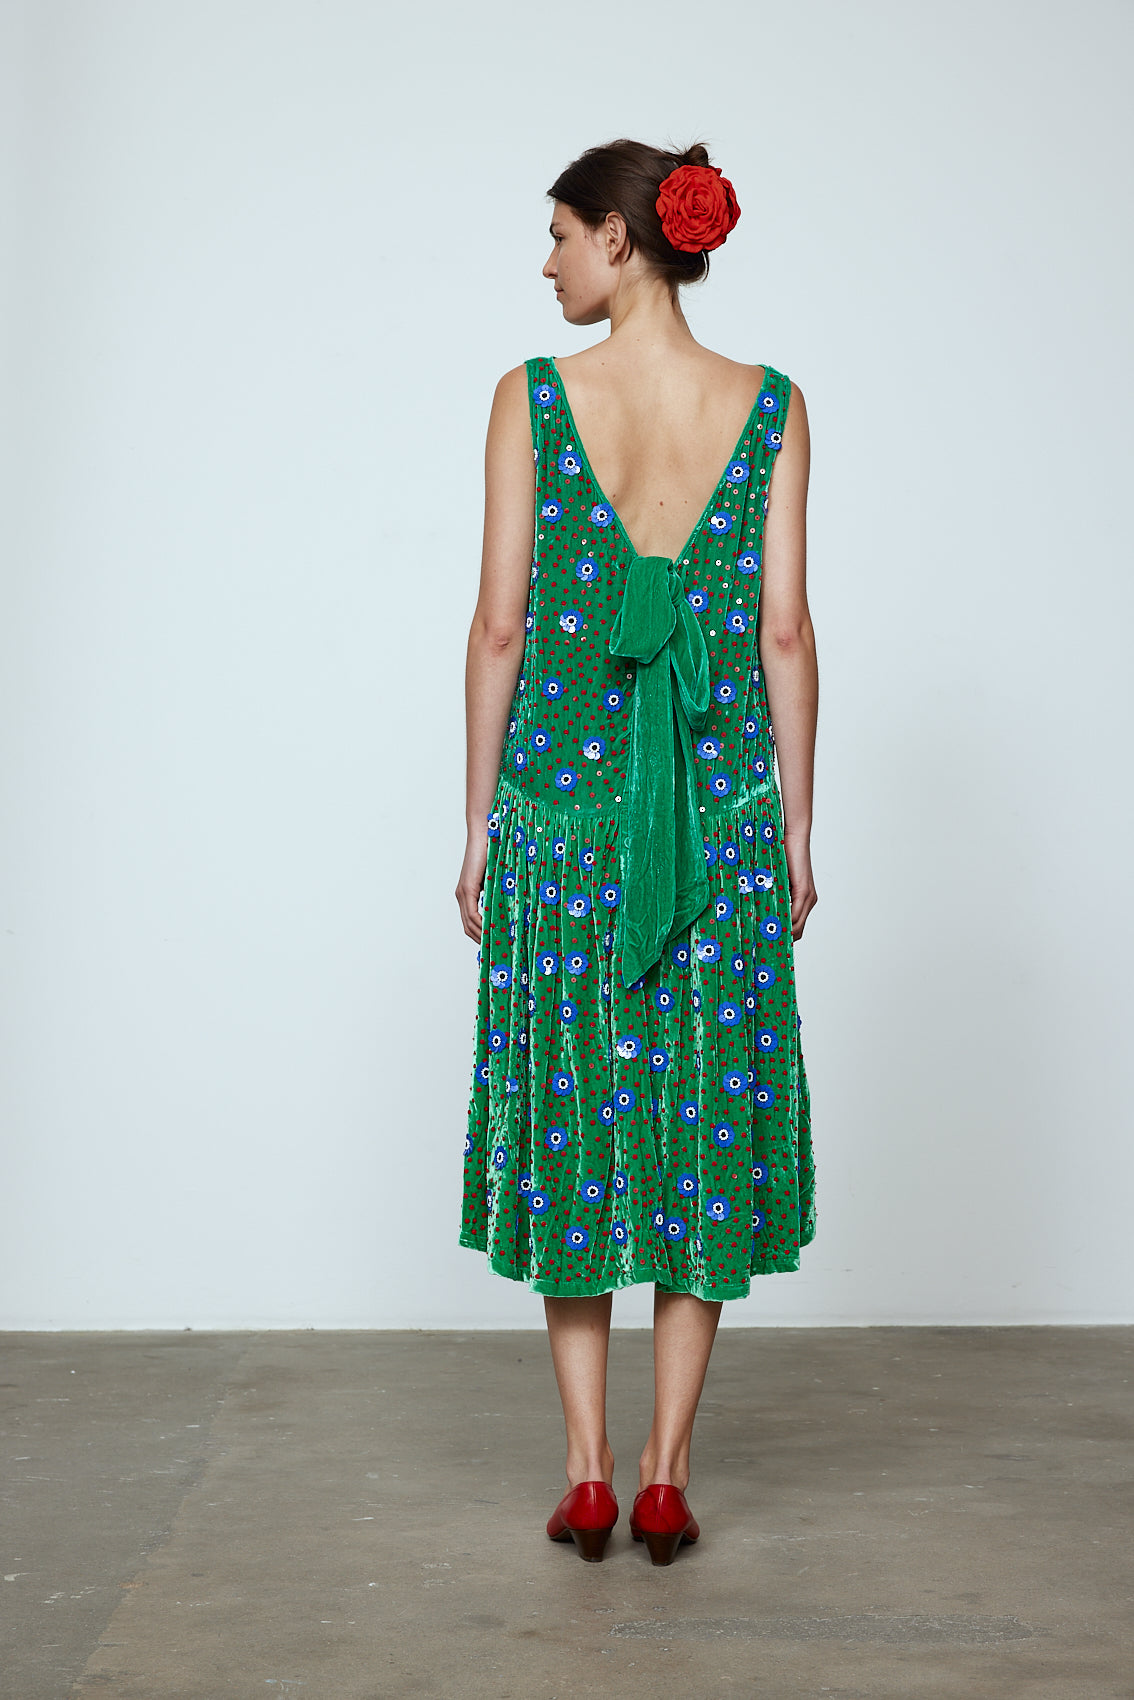 The Sonya Dress is an oversized style with a high neckline and deep back with large bow detail. The dress is made of luxuriously heavy emerald silk velvet with hand-embroidered beaded details.   Material: 20% silk, 80% viscose. Beading: 100% Polyester.  The model is 179cm (5'10") and wears size S.